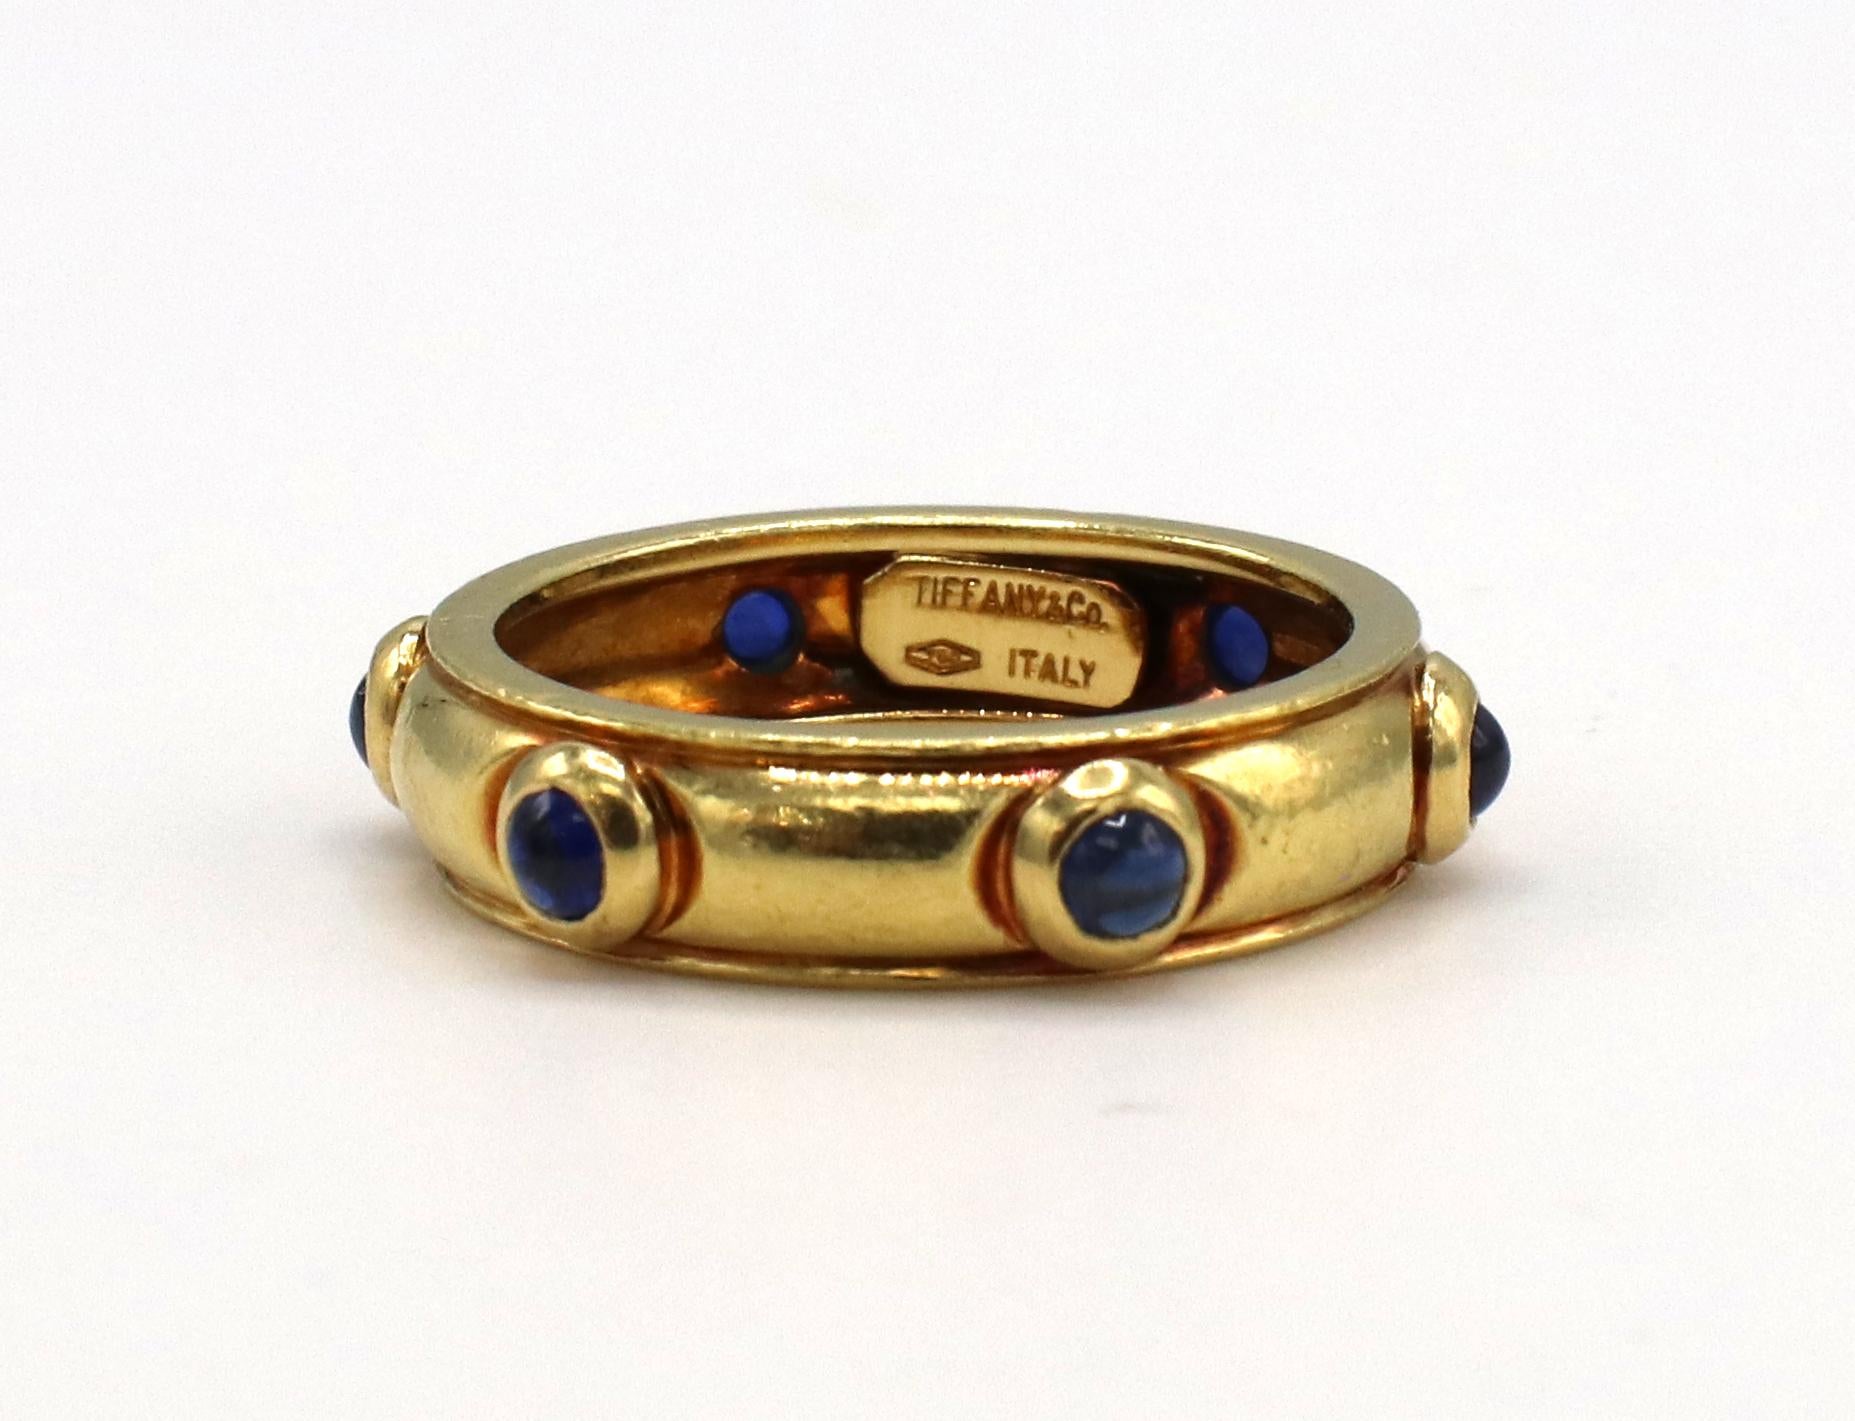 Tiffany & Co. Gold Blue Sapphire Cabochon Dome Band Ring 
Metal: 18k yellow gold
Weight: 6.35 grams
Size: 7.5 (US)
Width: 5mm 
Signed: Tiffany & Co. 750 ITALY